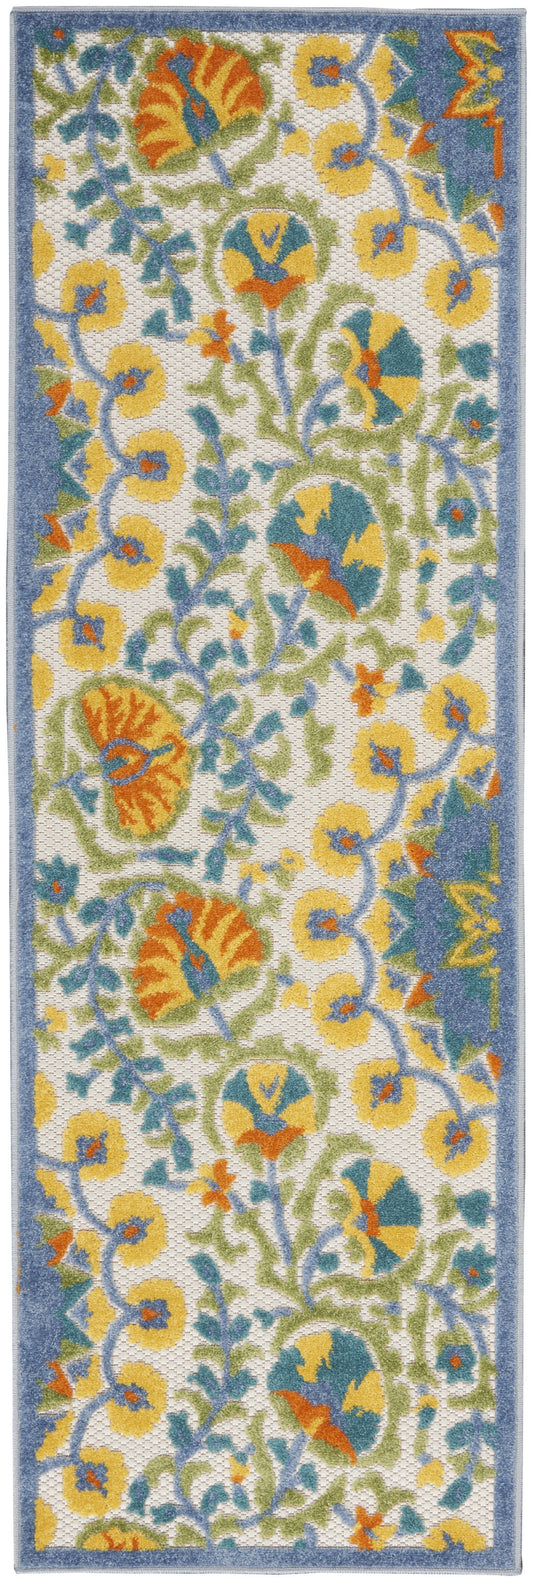 2' X 6' Blue Yellow And White Toile Non Skid Indoor Outdoor Runner Rug